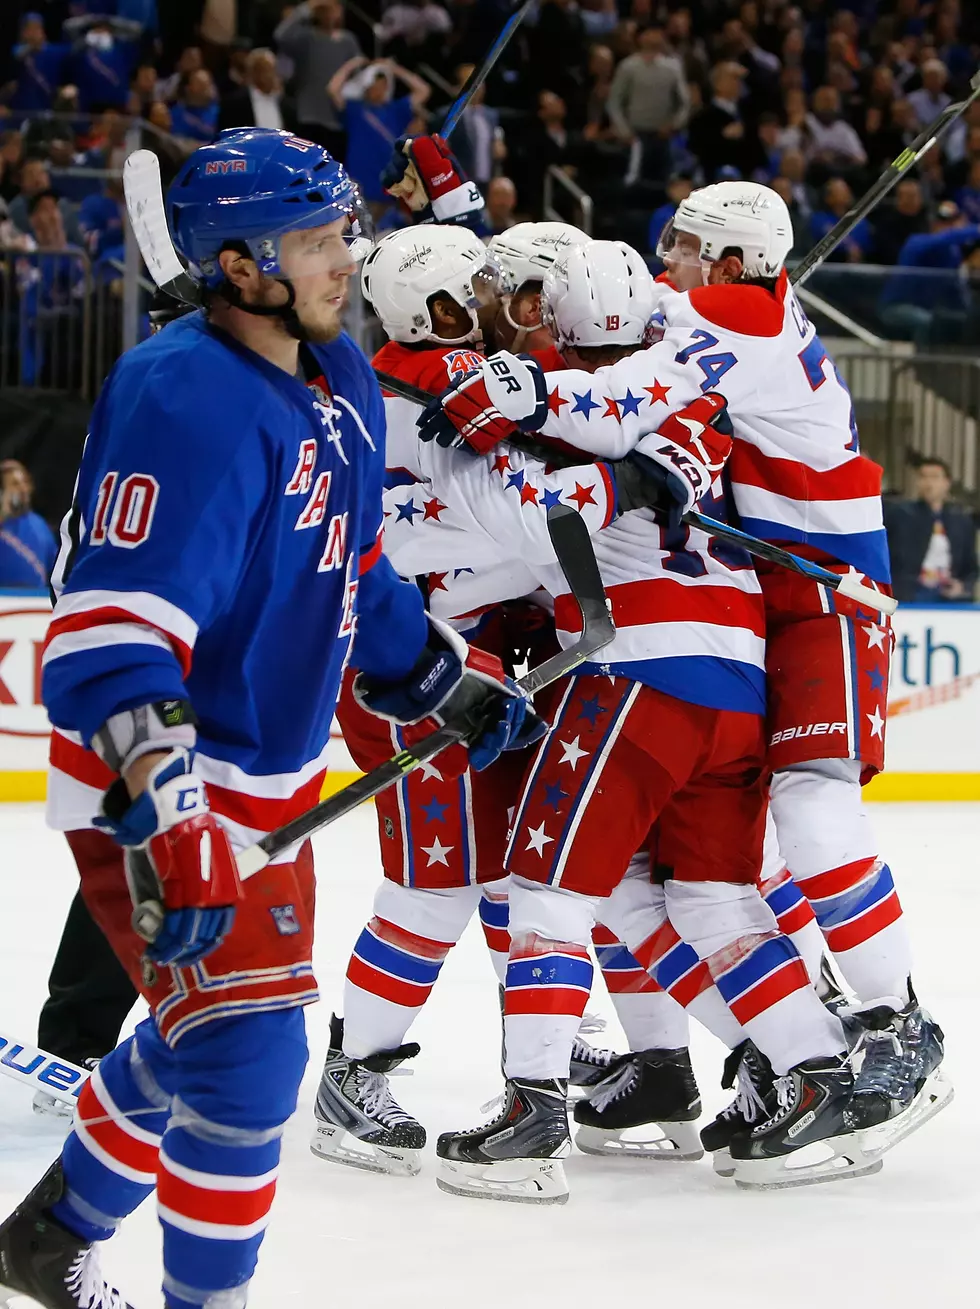 Rangers Lose Game 1 on Last Second Shot [VIDEO]